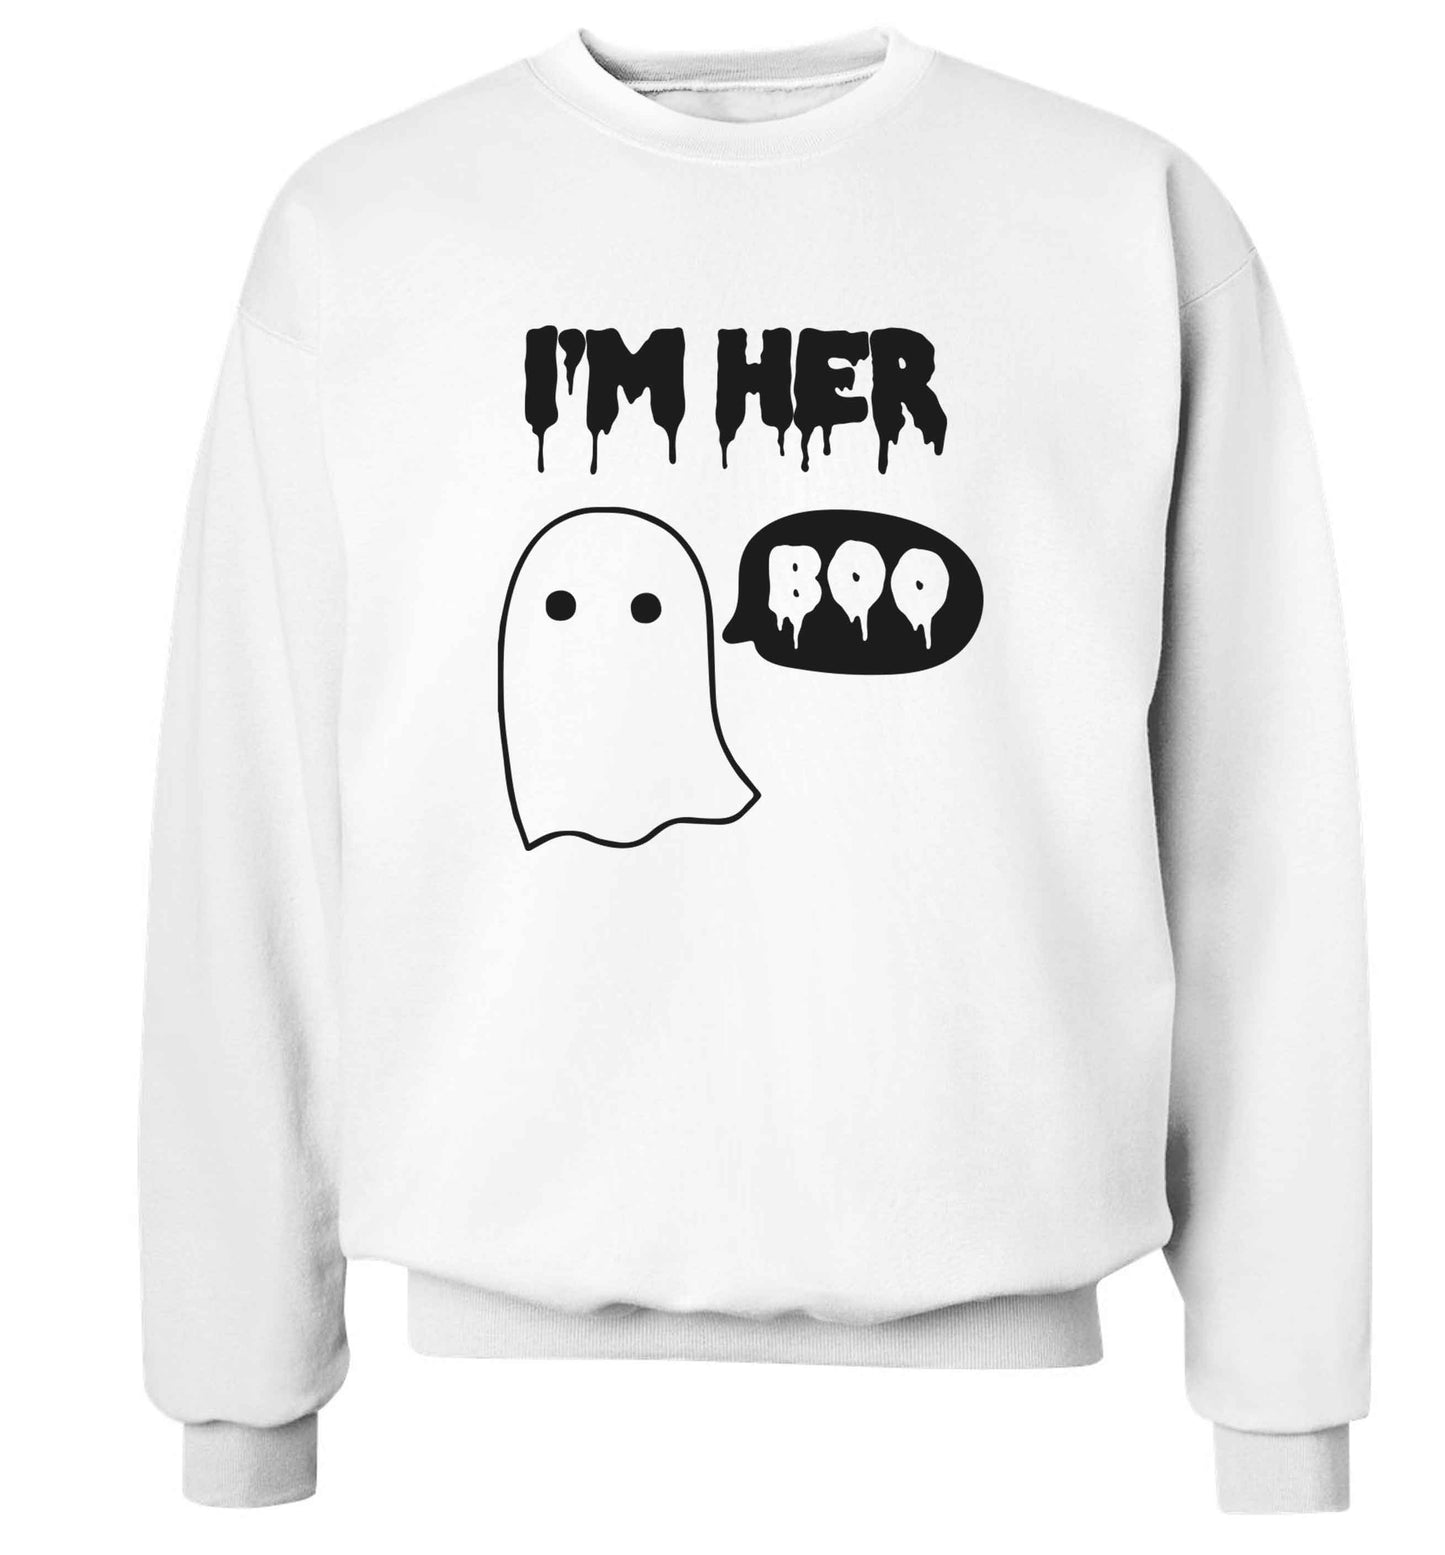 I'm her boo adult's unisex white sweater 2XL